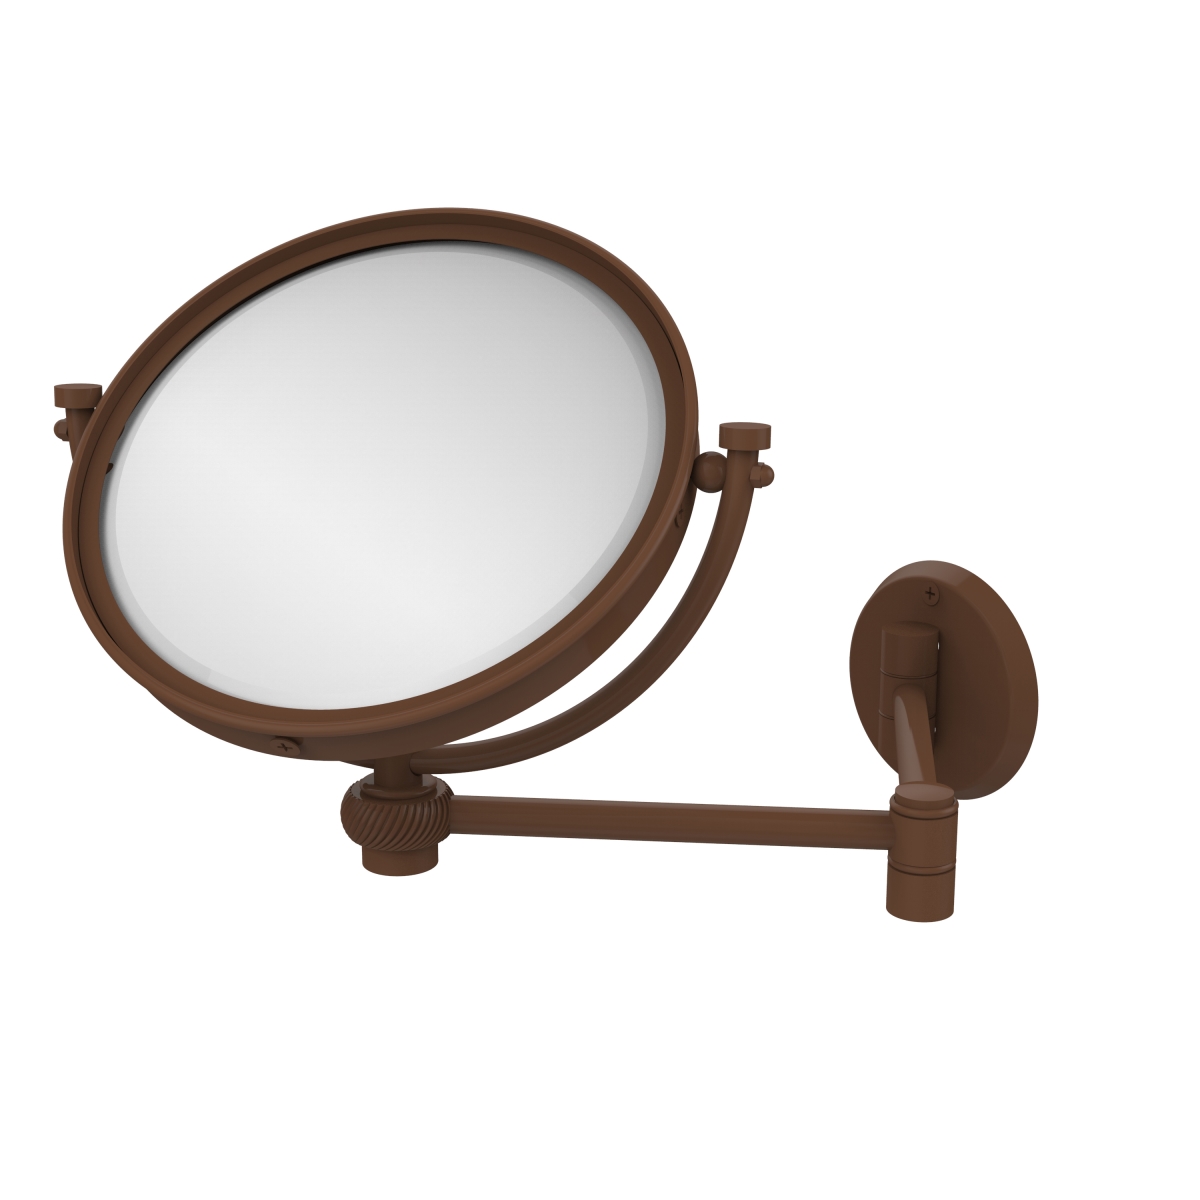 WM-6T-2X-ABZ 8 in. Wall Mounted Extending Make-Up Mirror 2X Magnification with Twist Accent, Antique Bronze -  Allied Brass, WM-6T/2X-ABZ